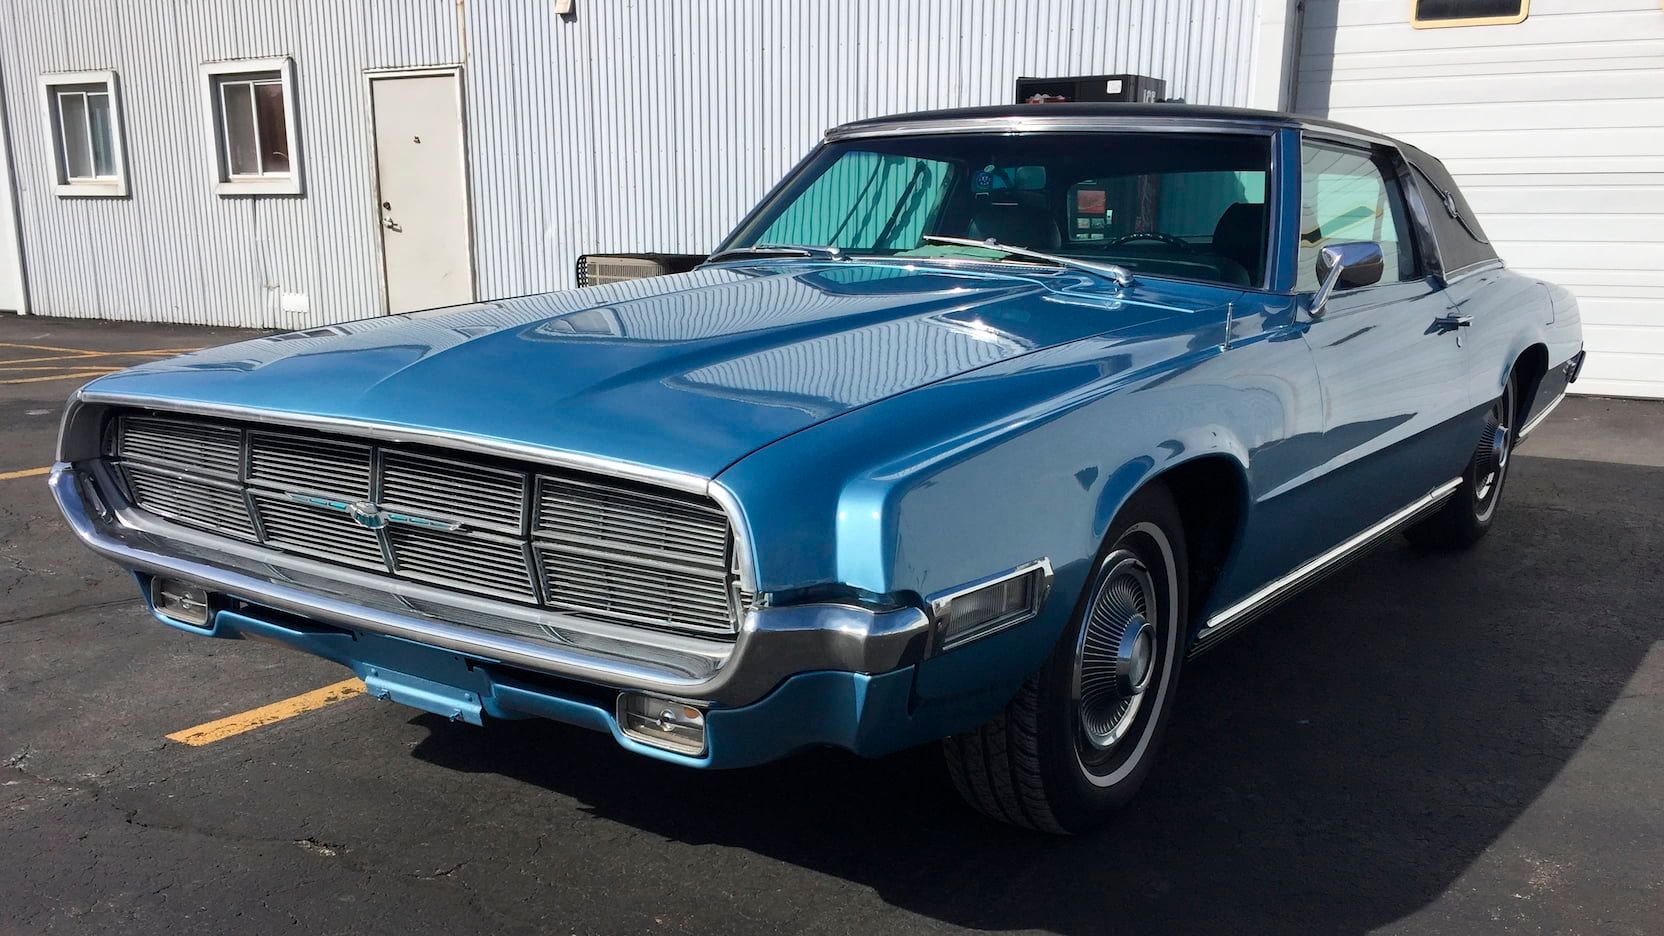 Blue 1969 Ford Thunderbird on the parking lot